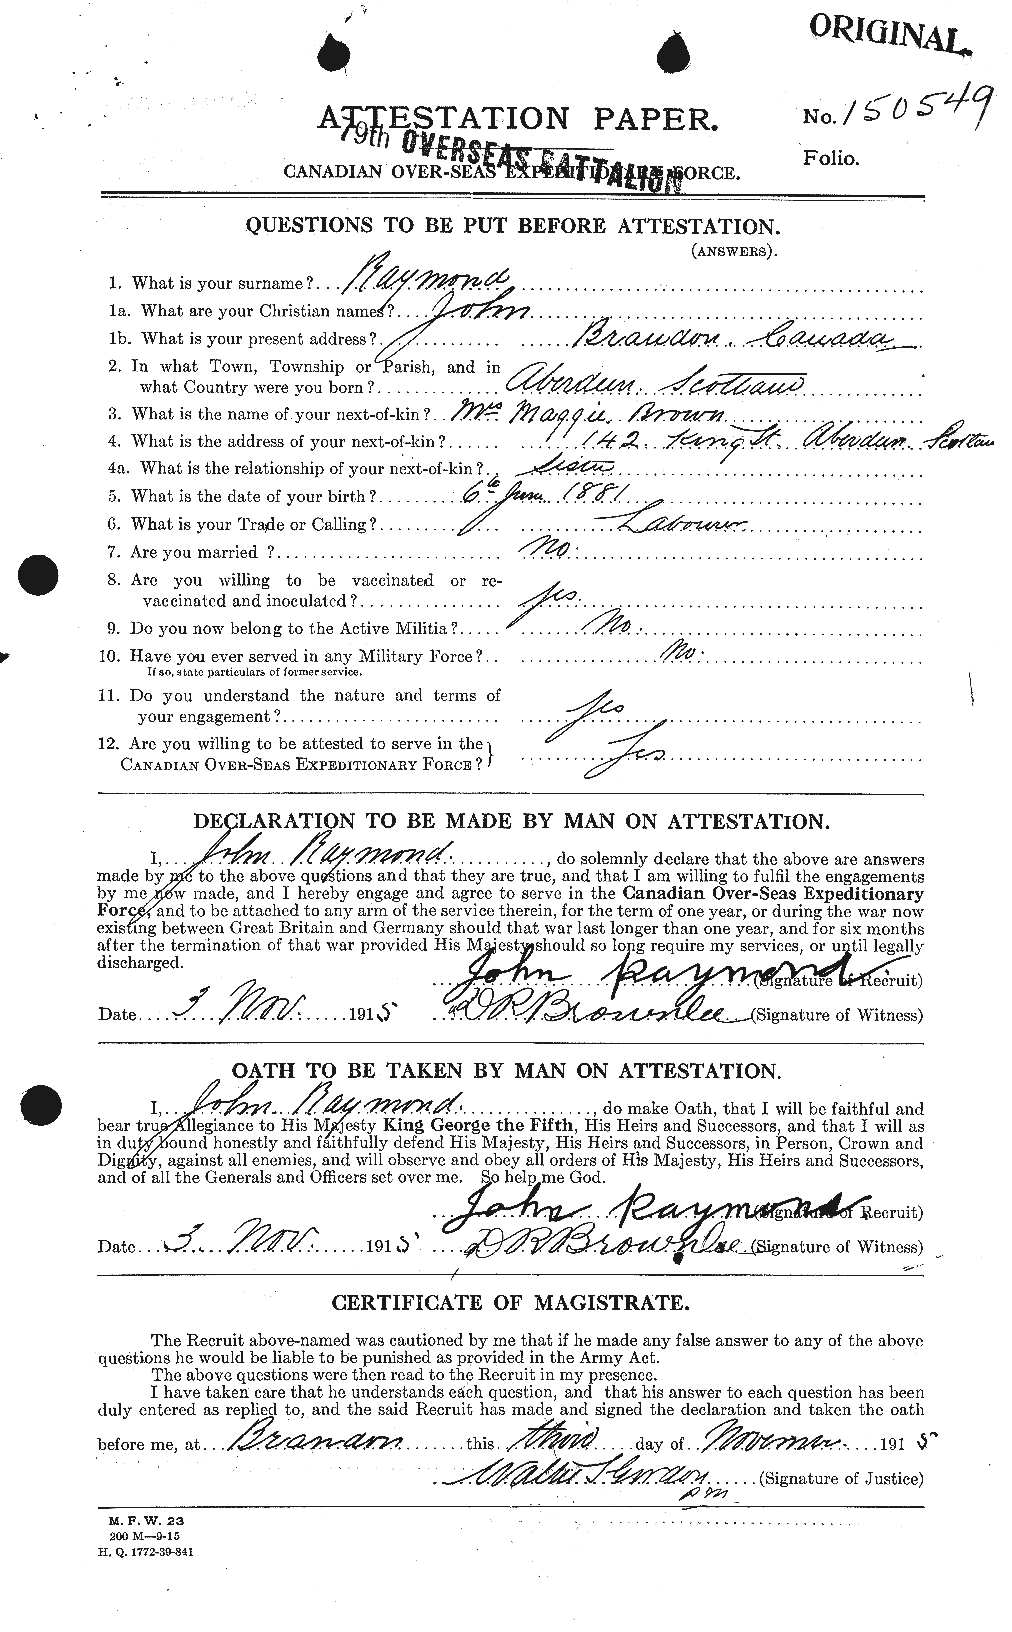 Personnel Records of the First World War - CEF 595376a